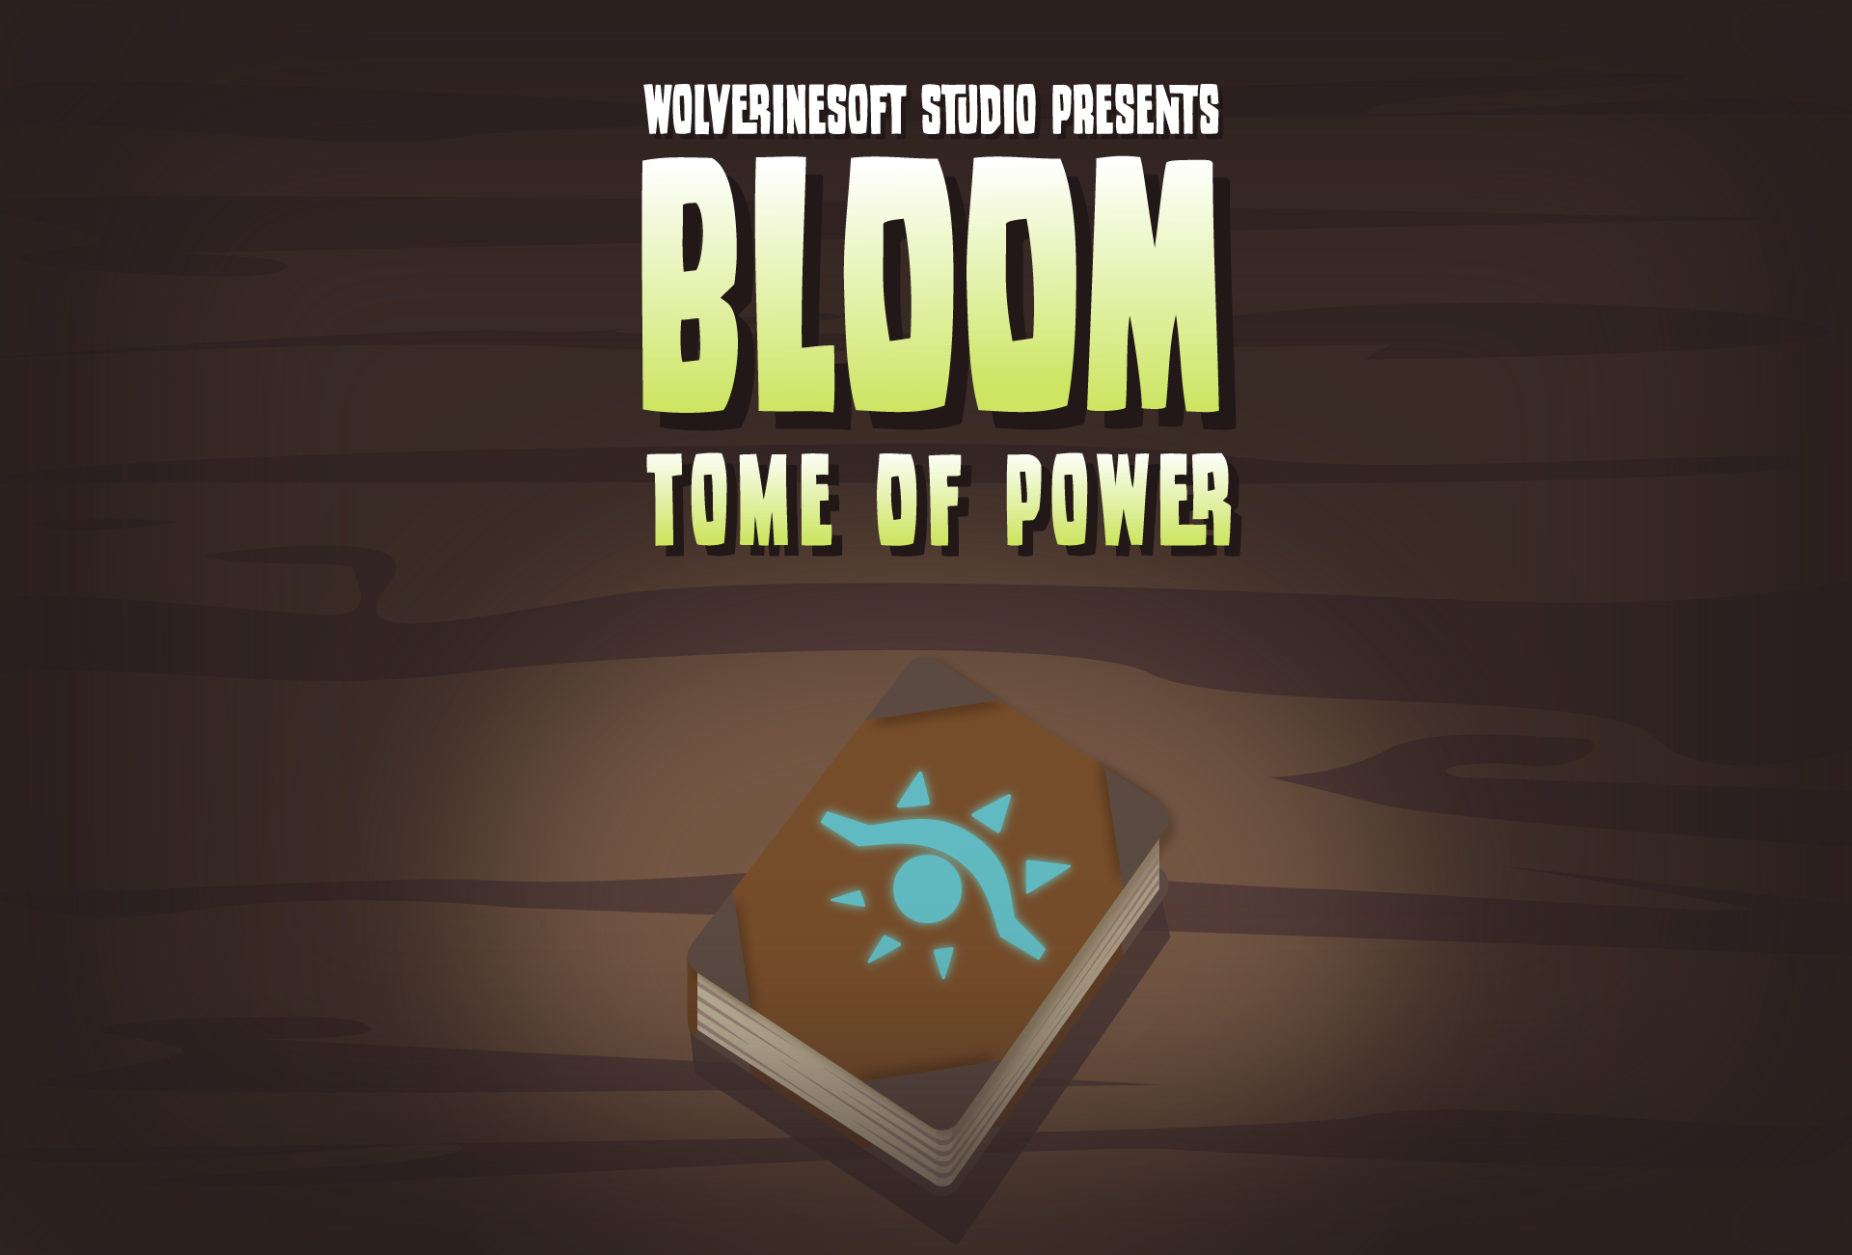 Bloom: Tome of Power